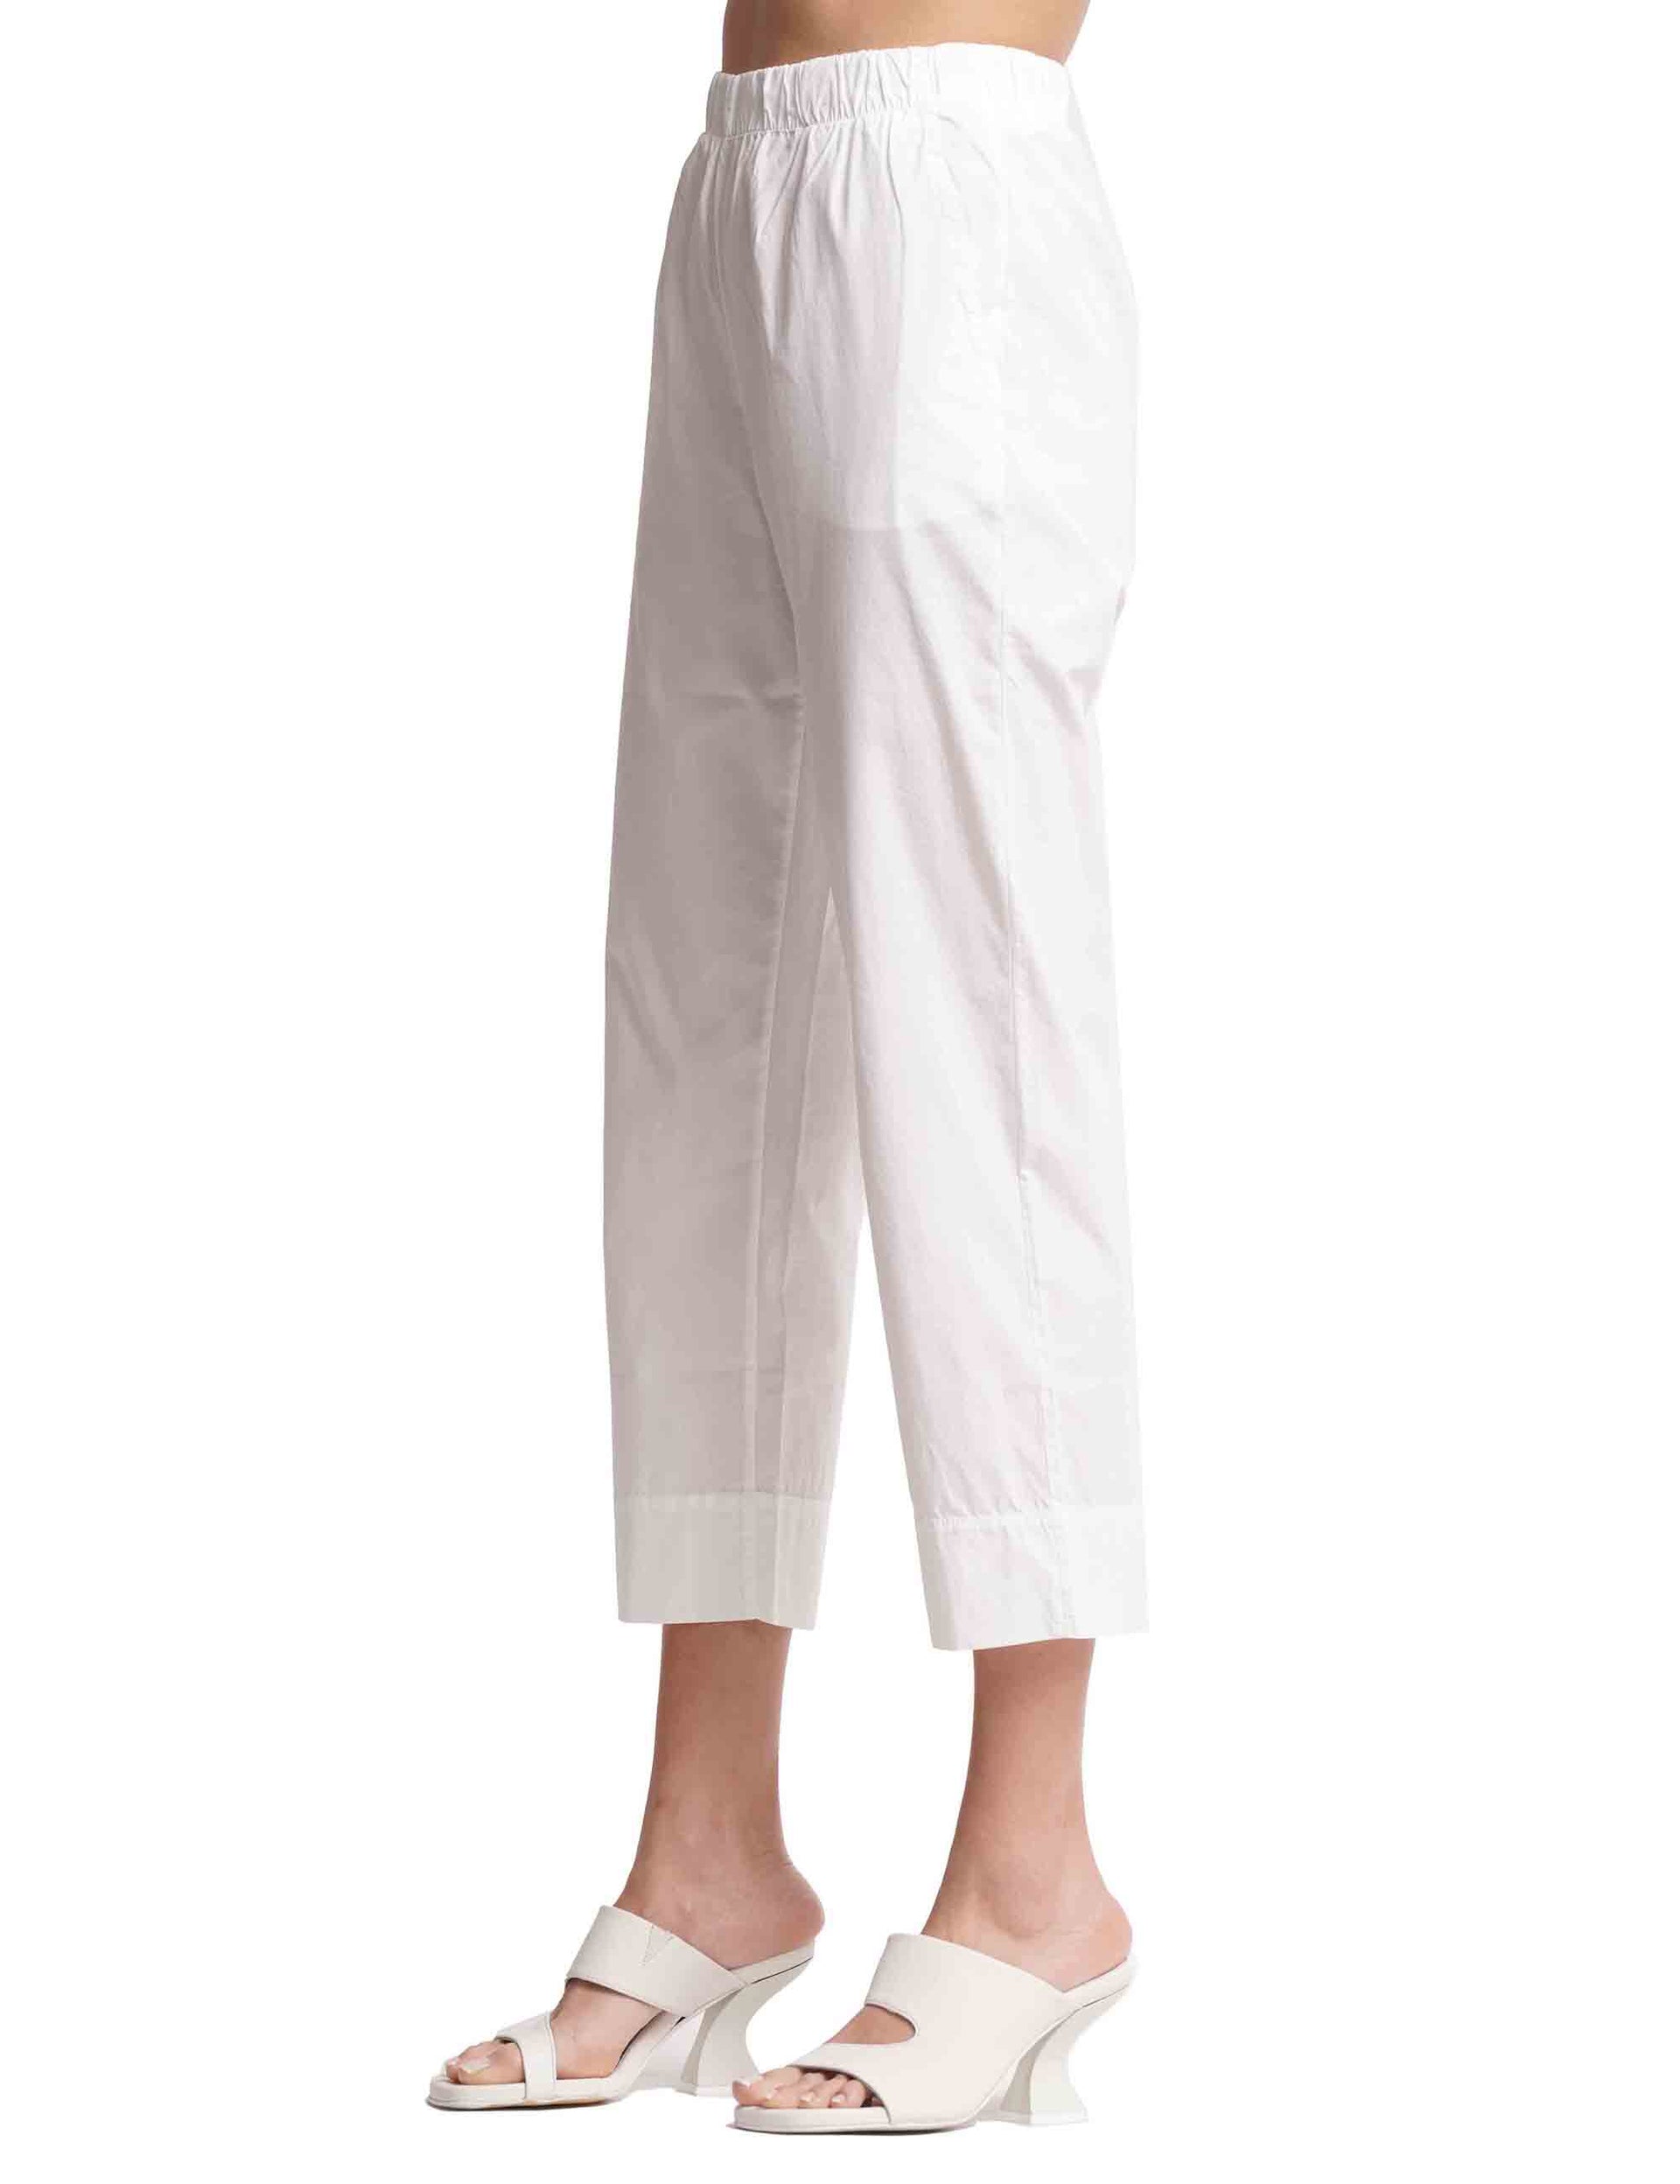 Women's white cotton trousers with elastic waist